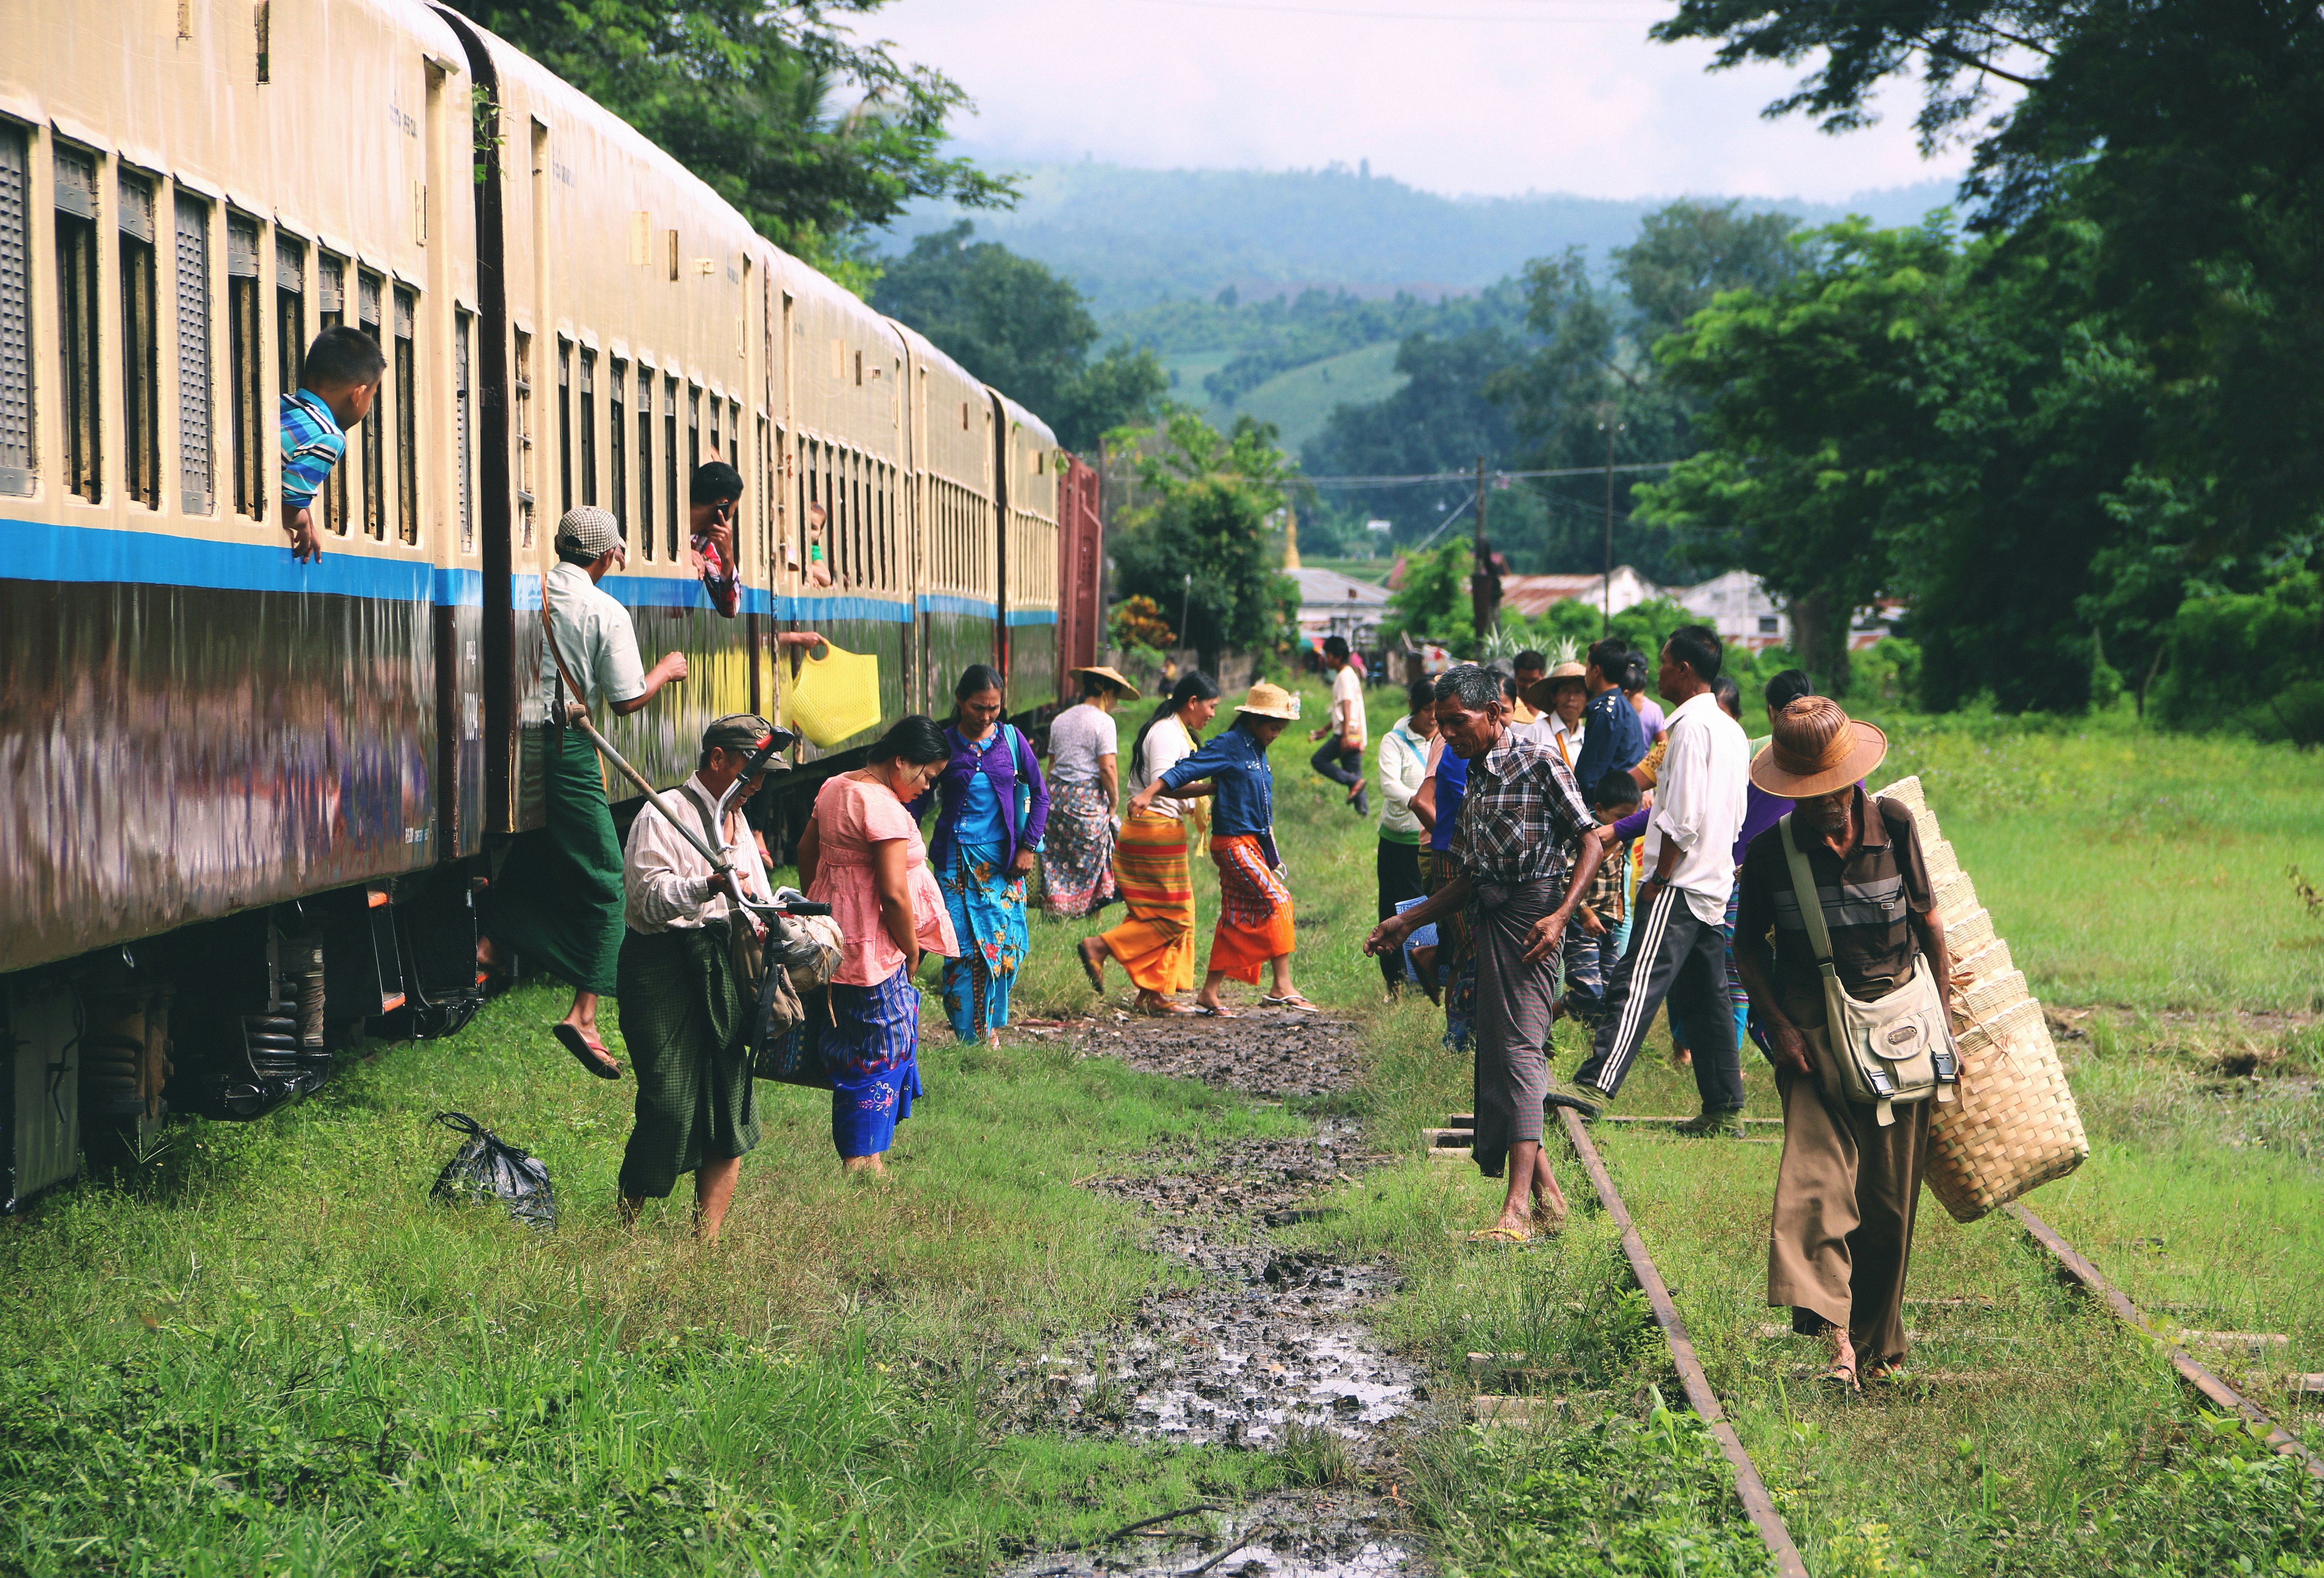 group of people standing outside train